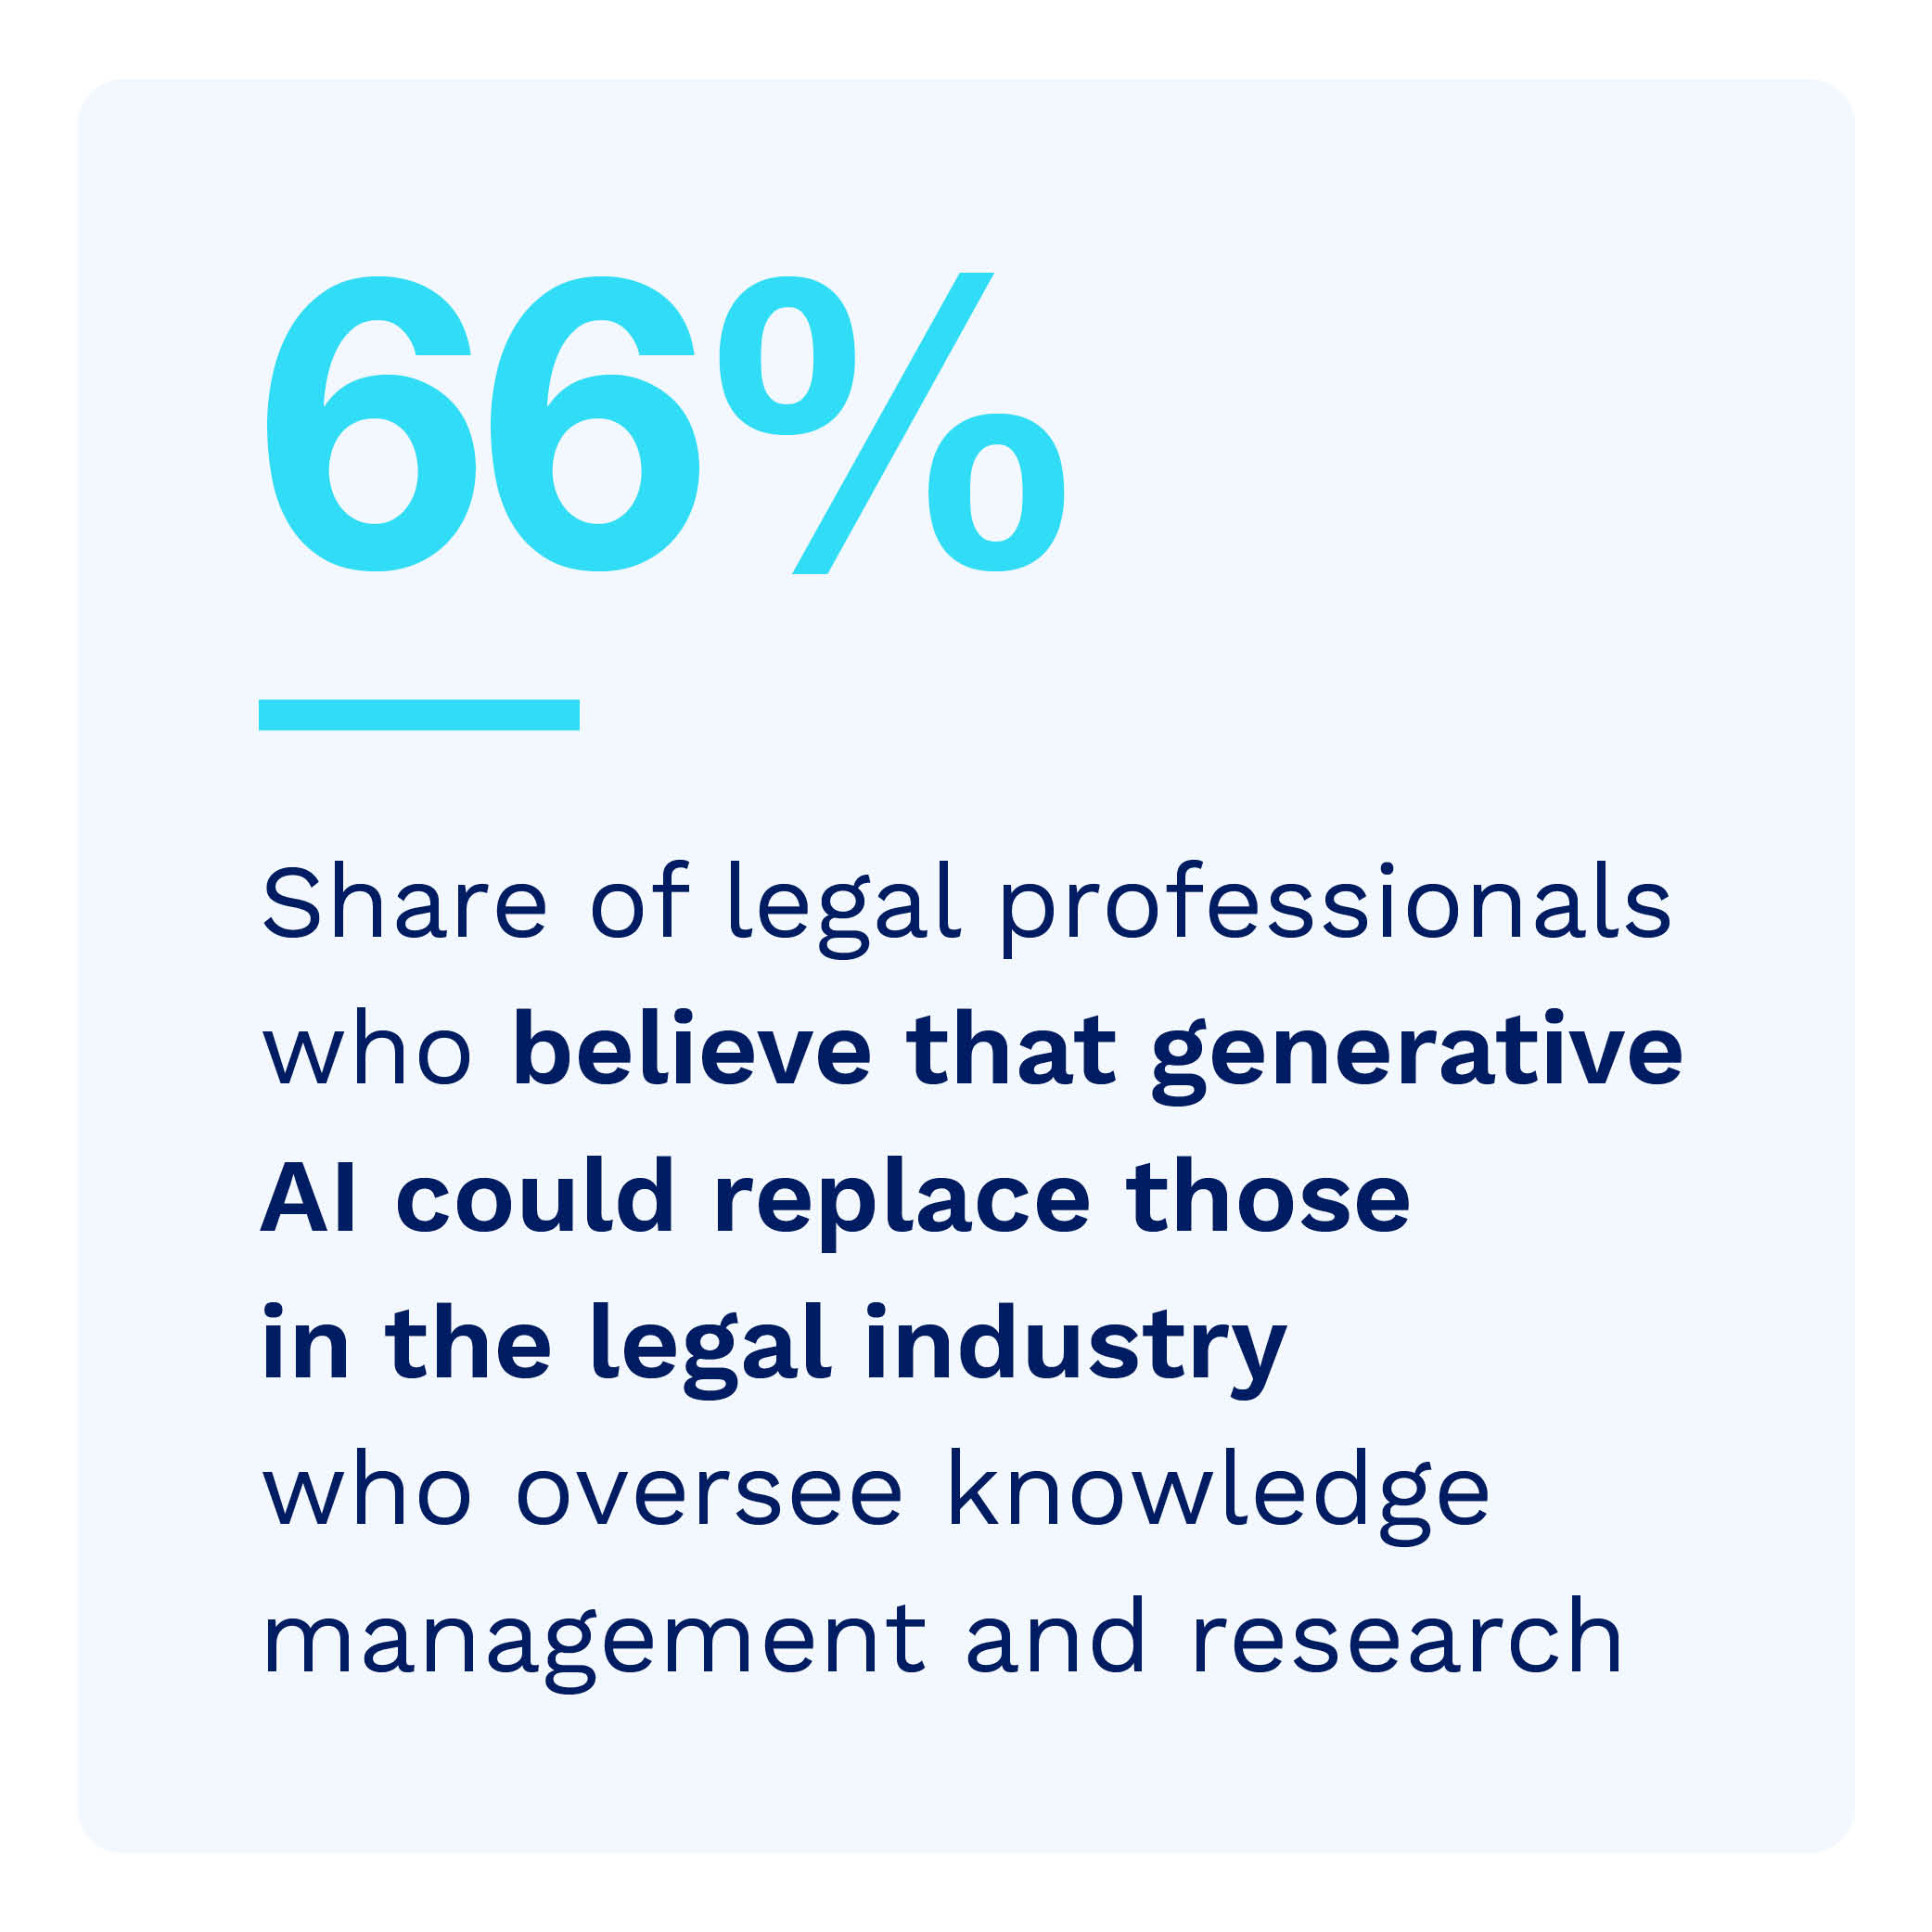 66%: Share of legal professionals who believe that generative AI could replace those in the legal industry who oversee knowledge management and research